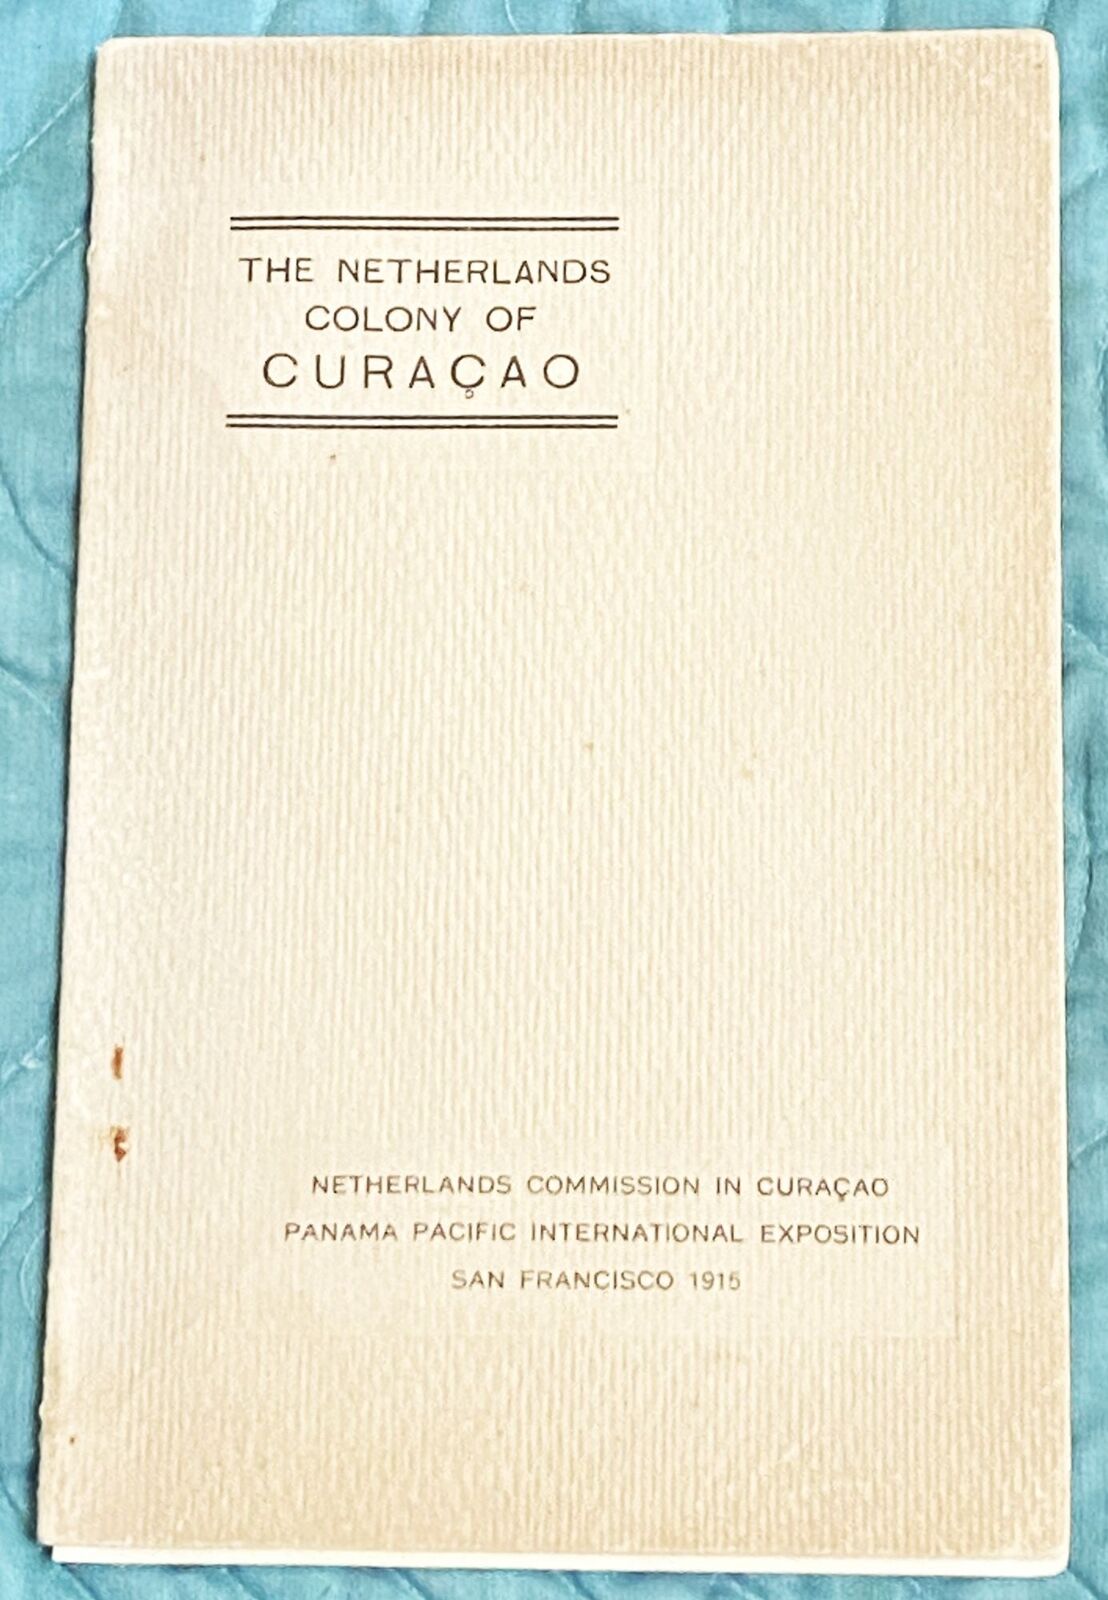 Panama Pacific International / NETHERLANDS COLONY OF CURACAO THE HARBOR 1915